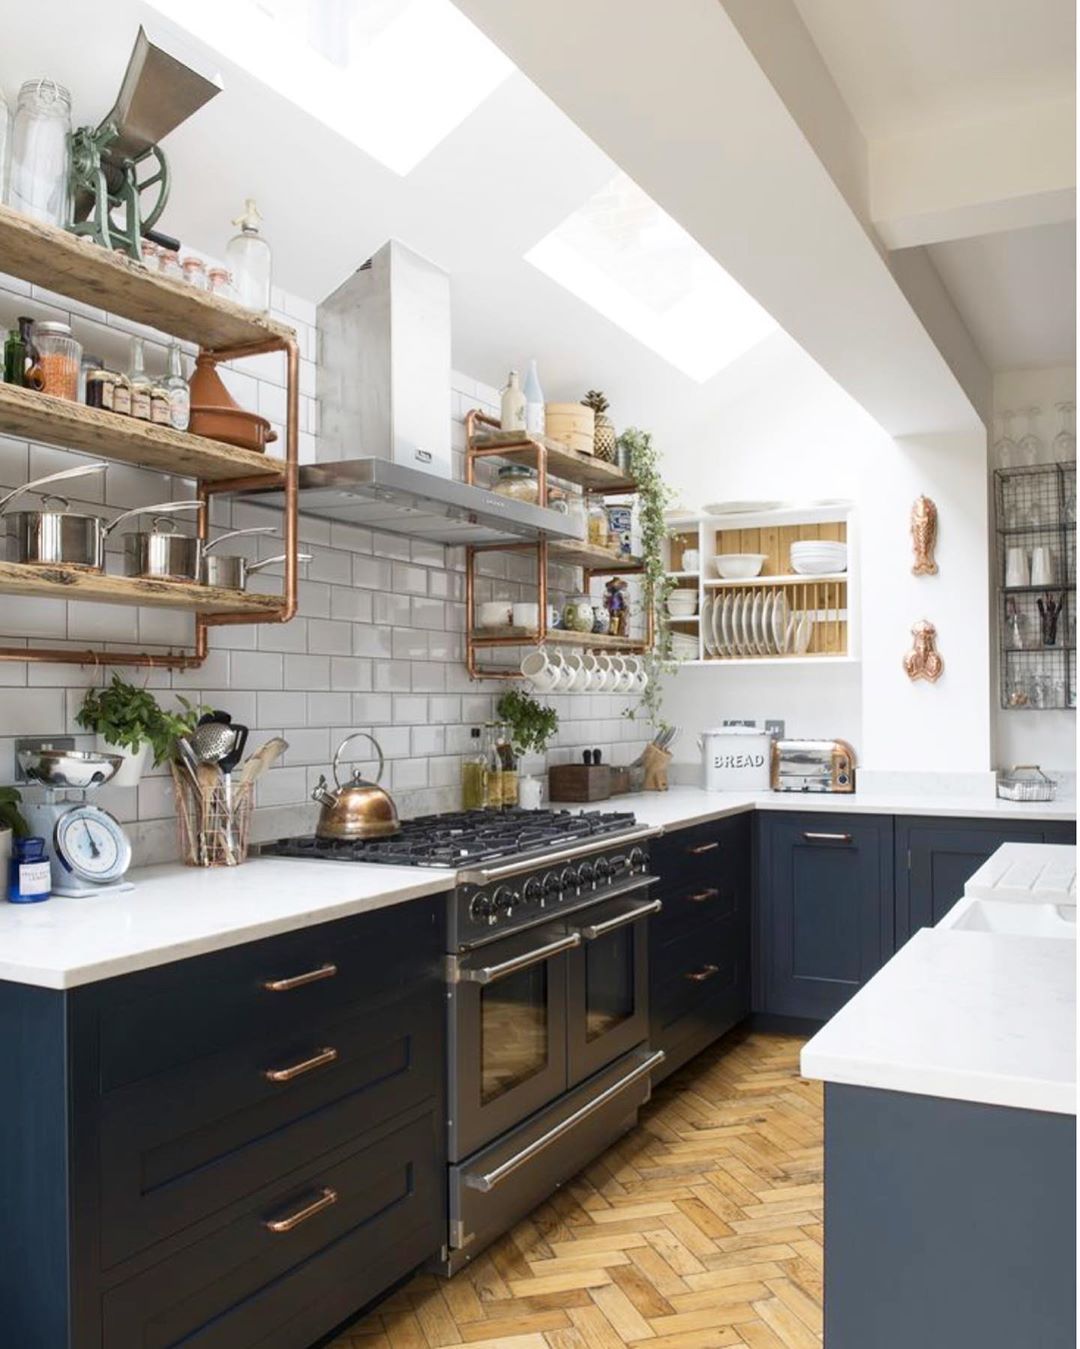 22 Small Kitchen Ideas To Make The Most Of Your Space